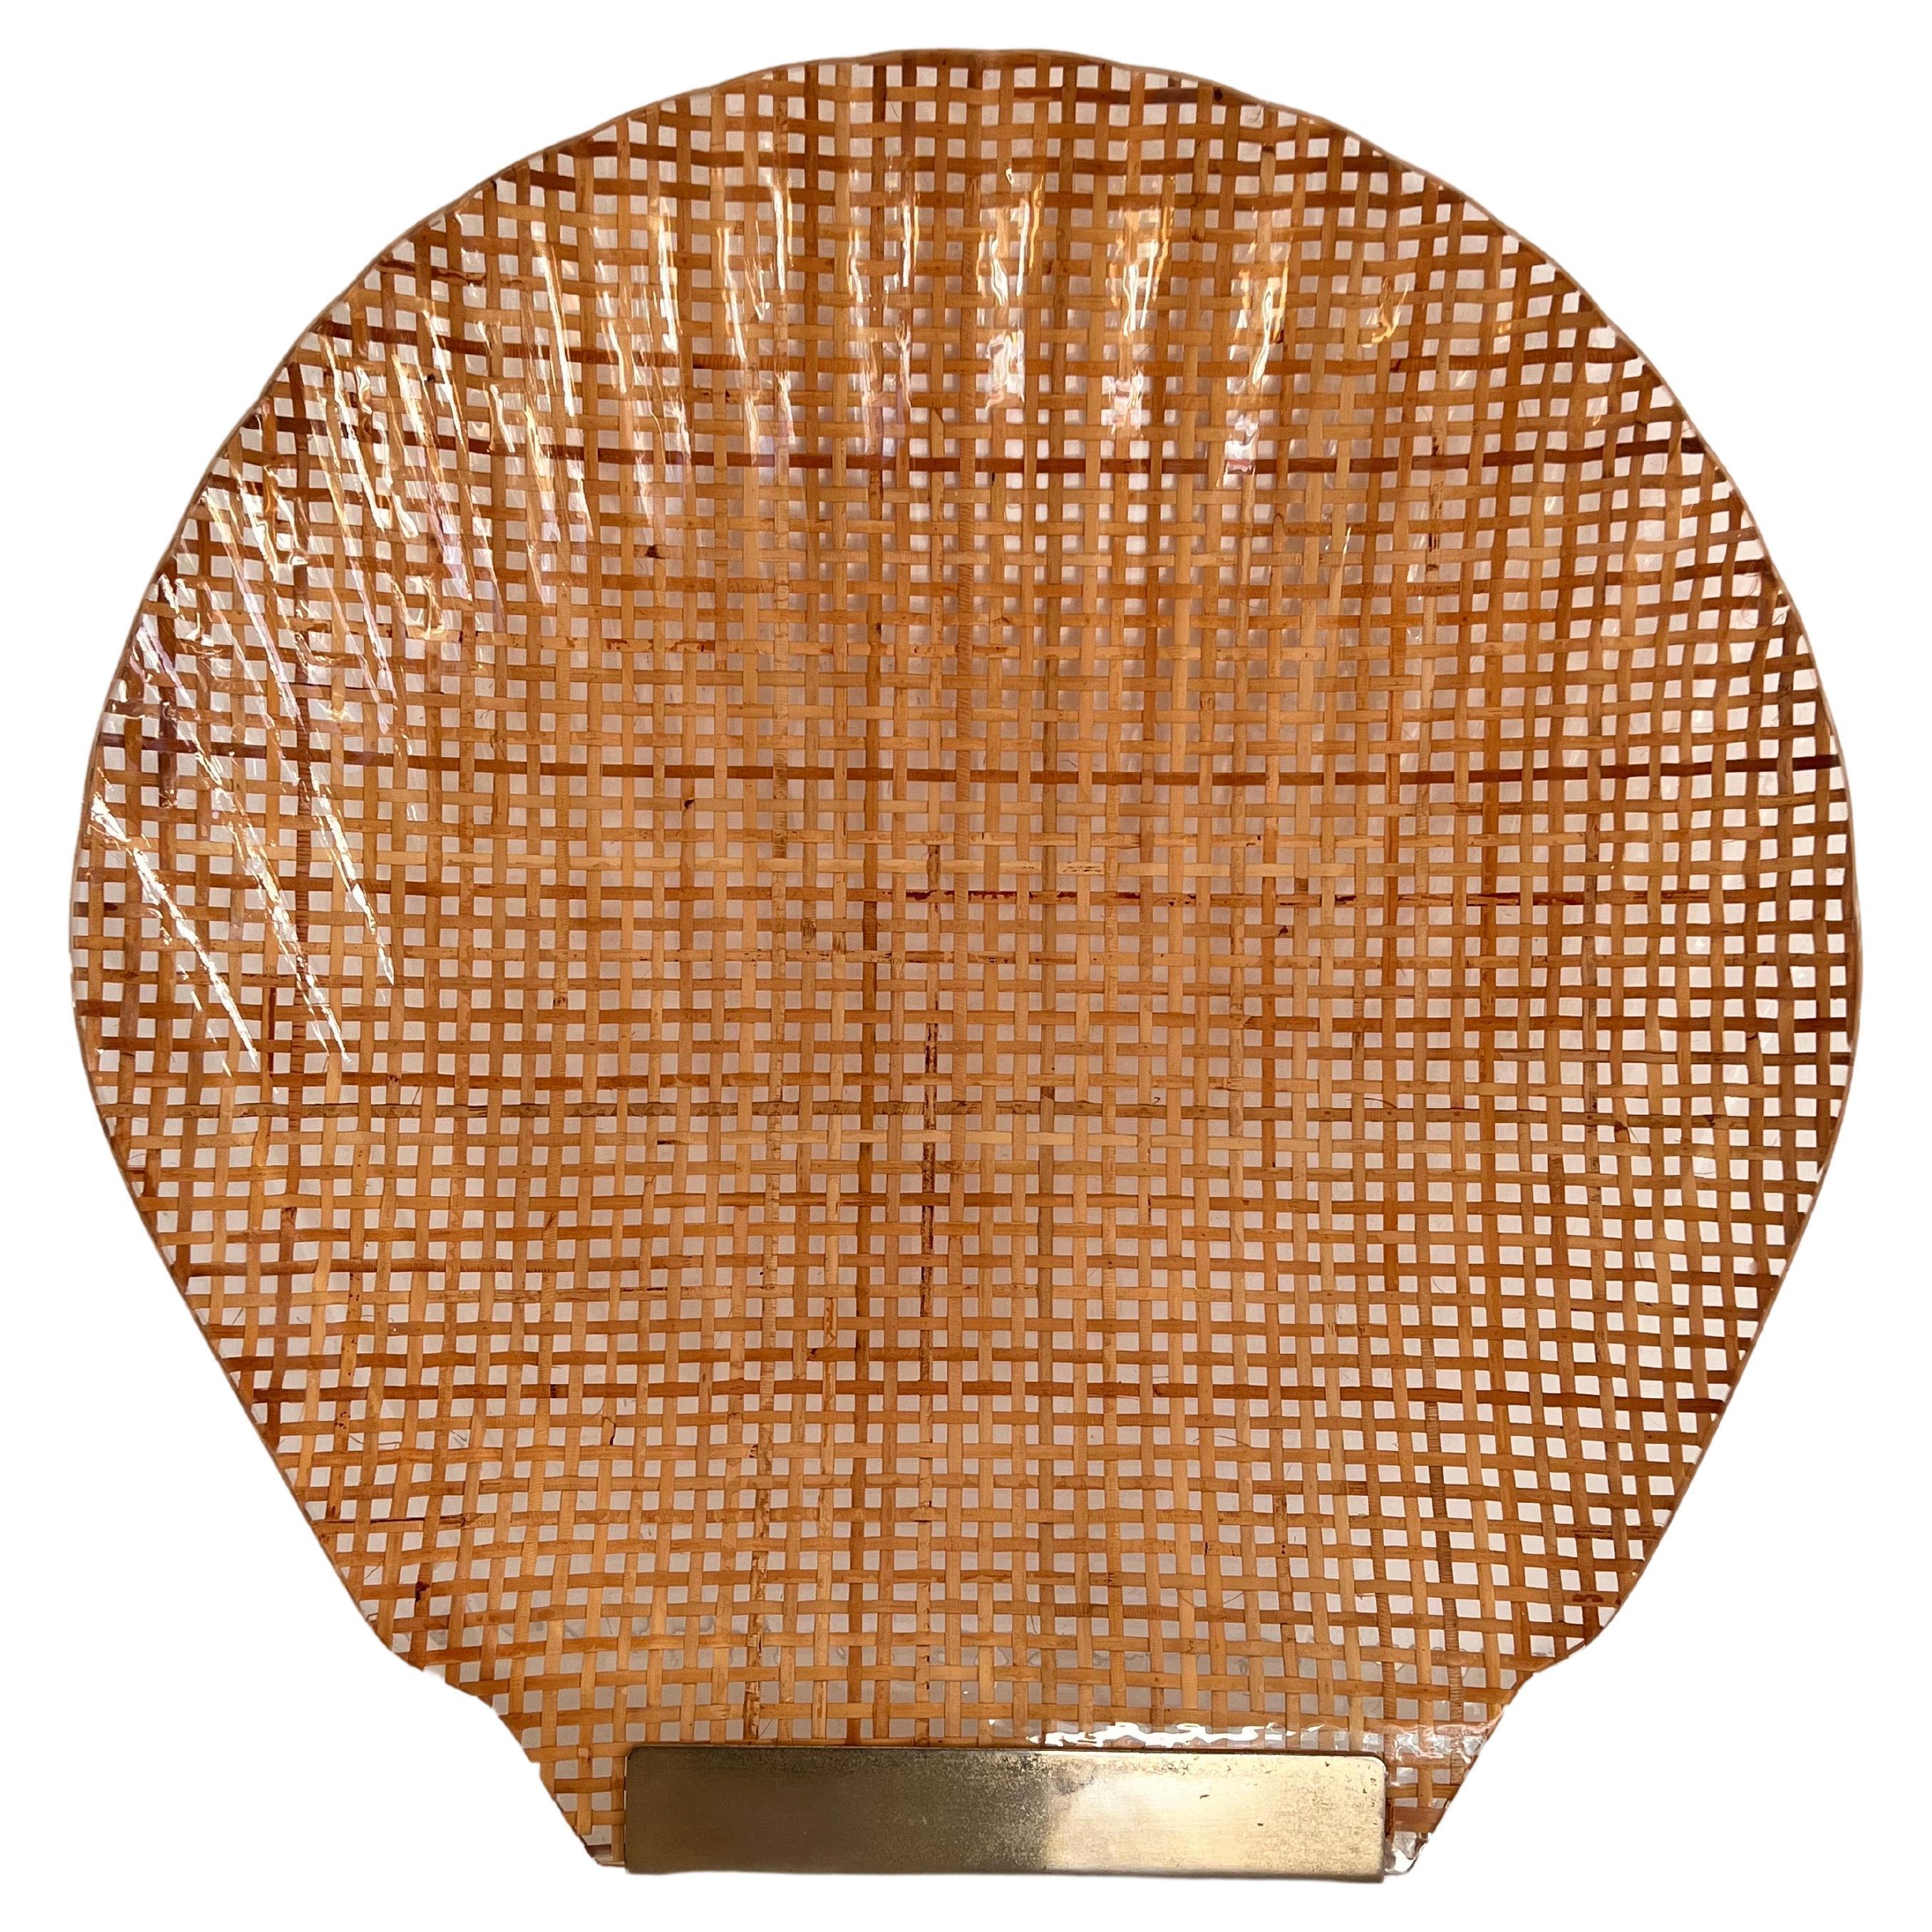 Italian MidCentury Serving Tray in Lucite, Rattan and Brass in Shell Shape, 1970 For Sale